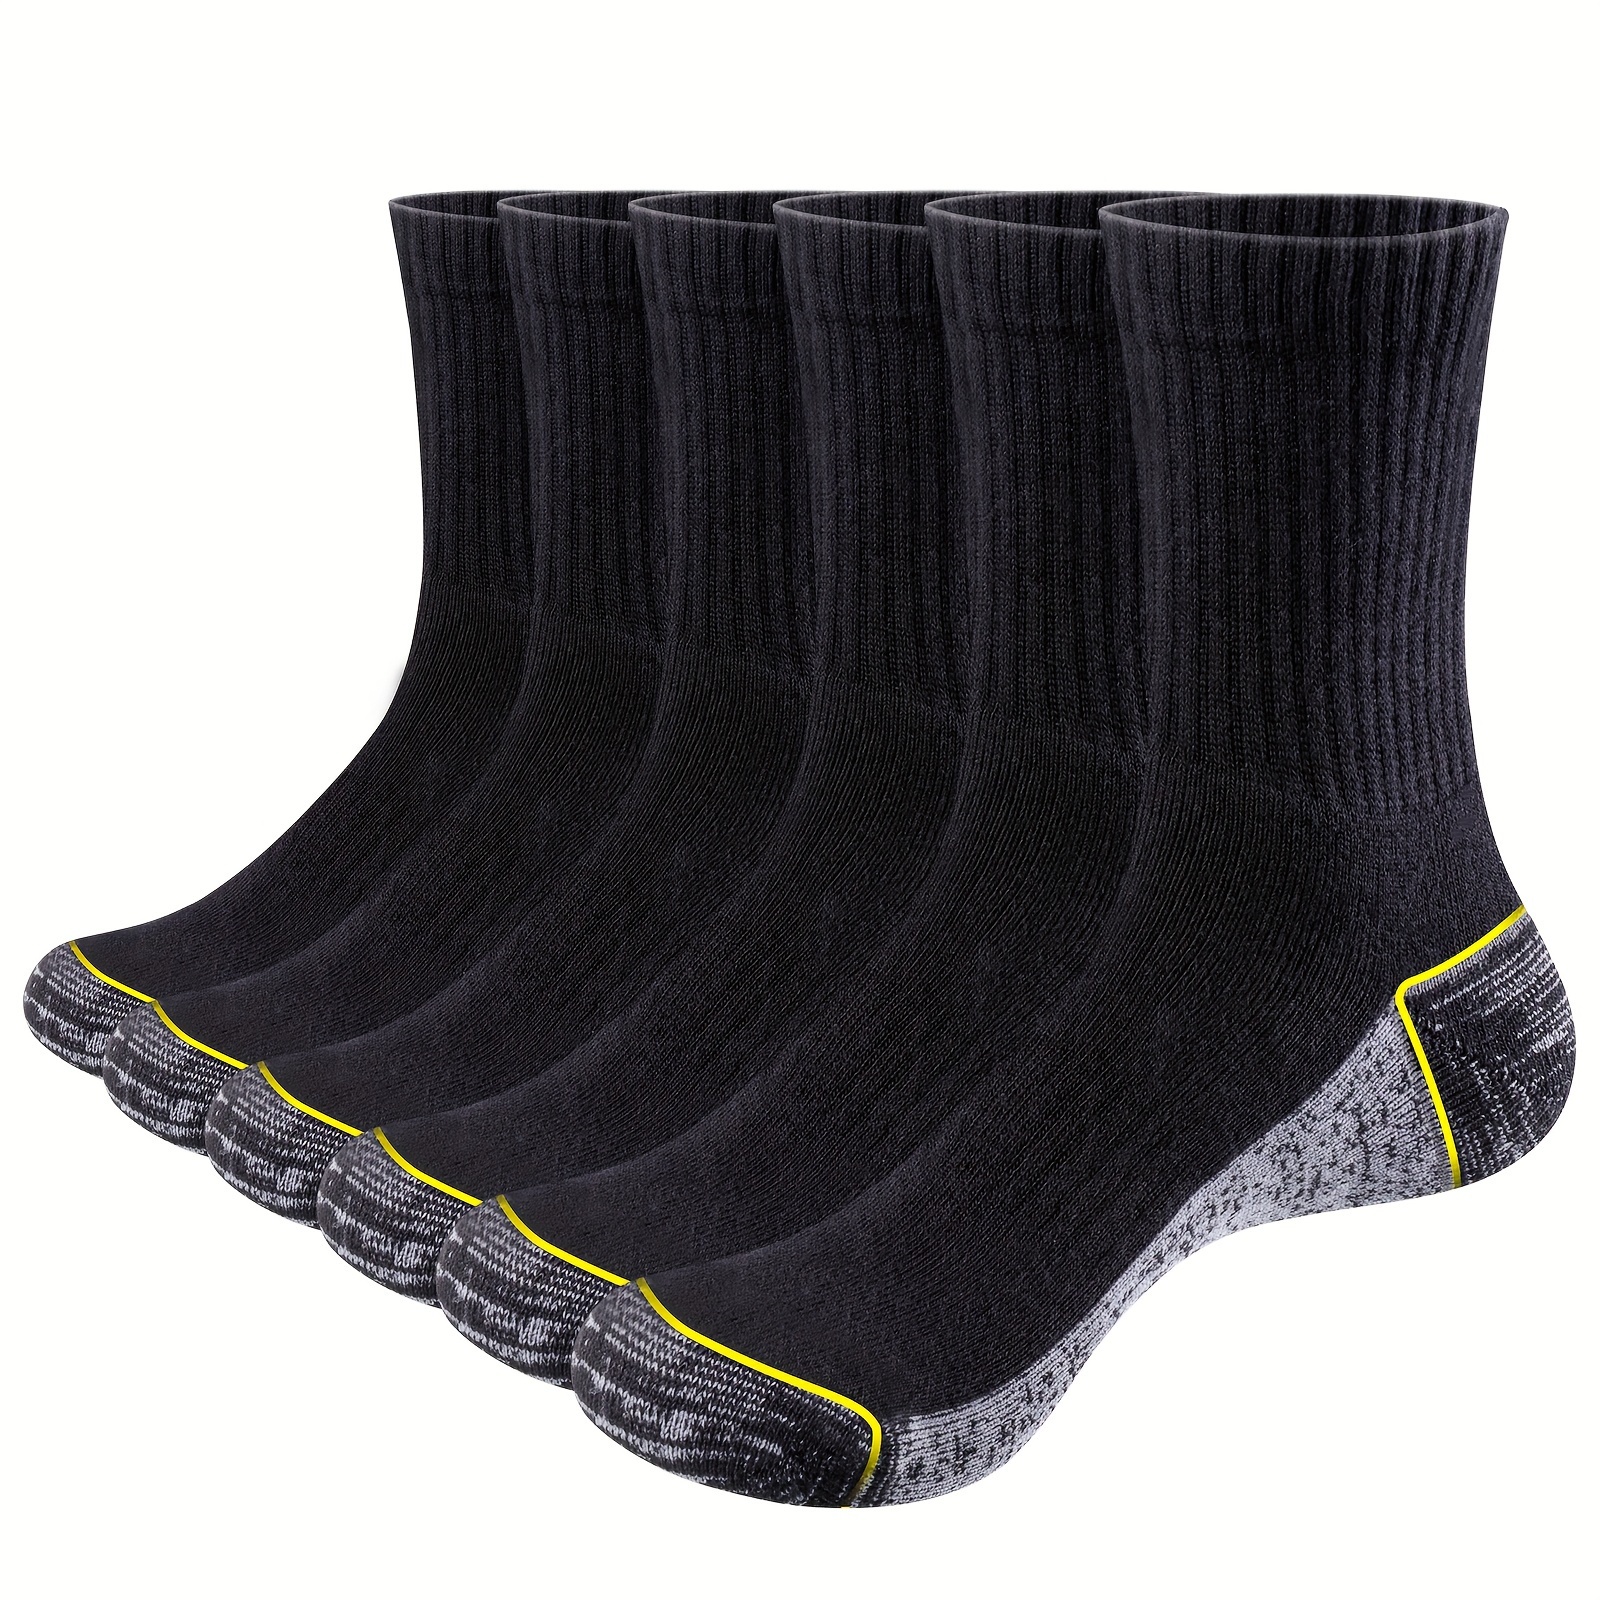 

6 Pairs Men's Thick Cushioned Moisture Wicking Crew Boot Socks For Men Workout Outdoor Sports Socks Black Grey White